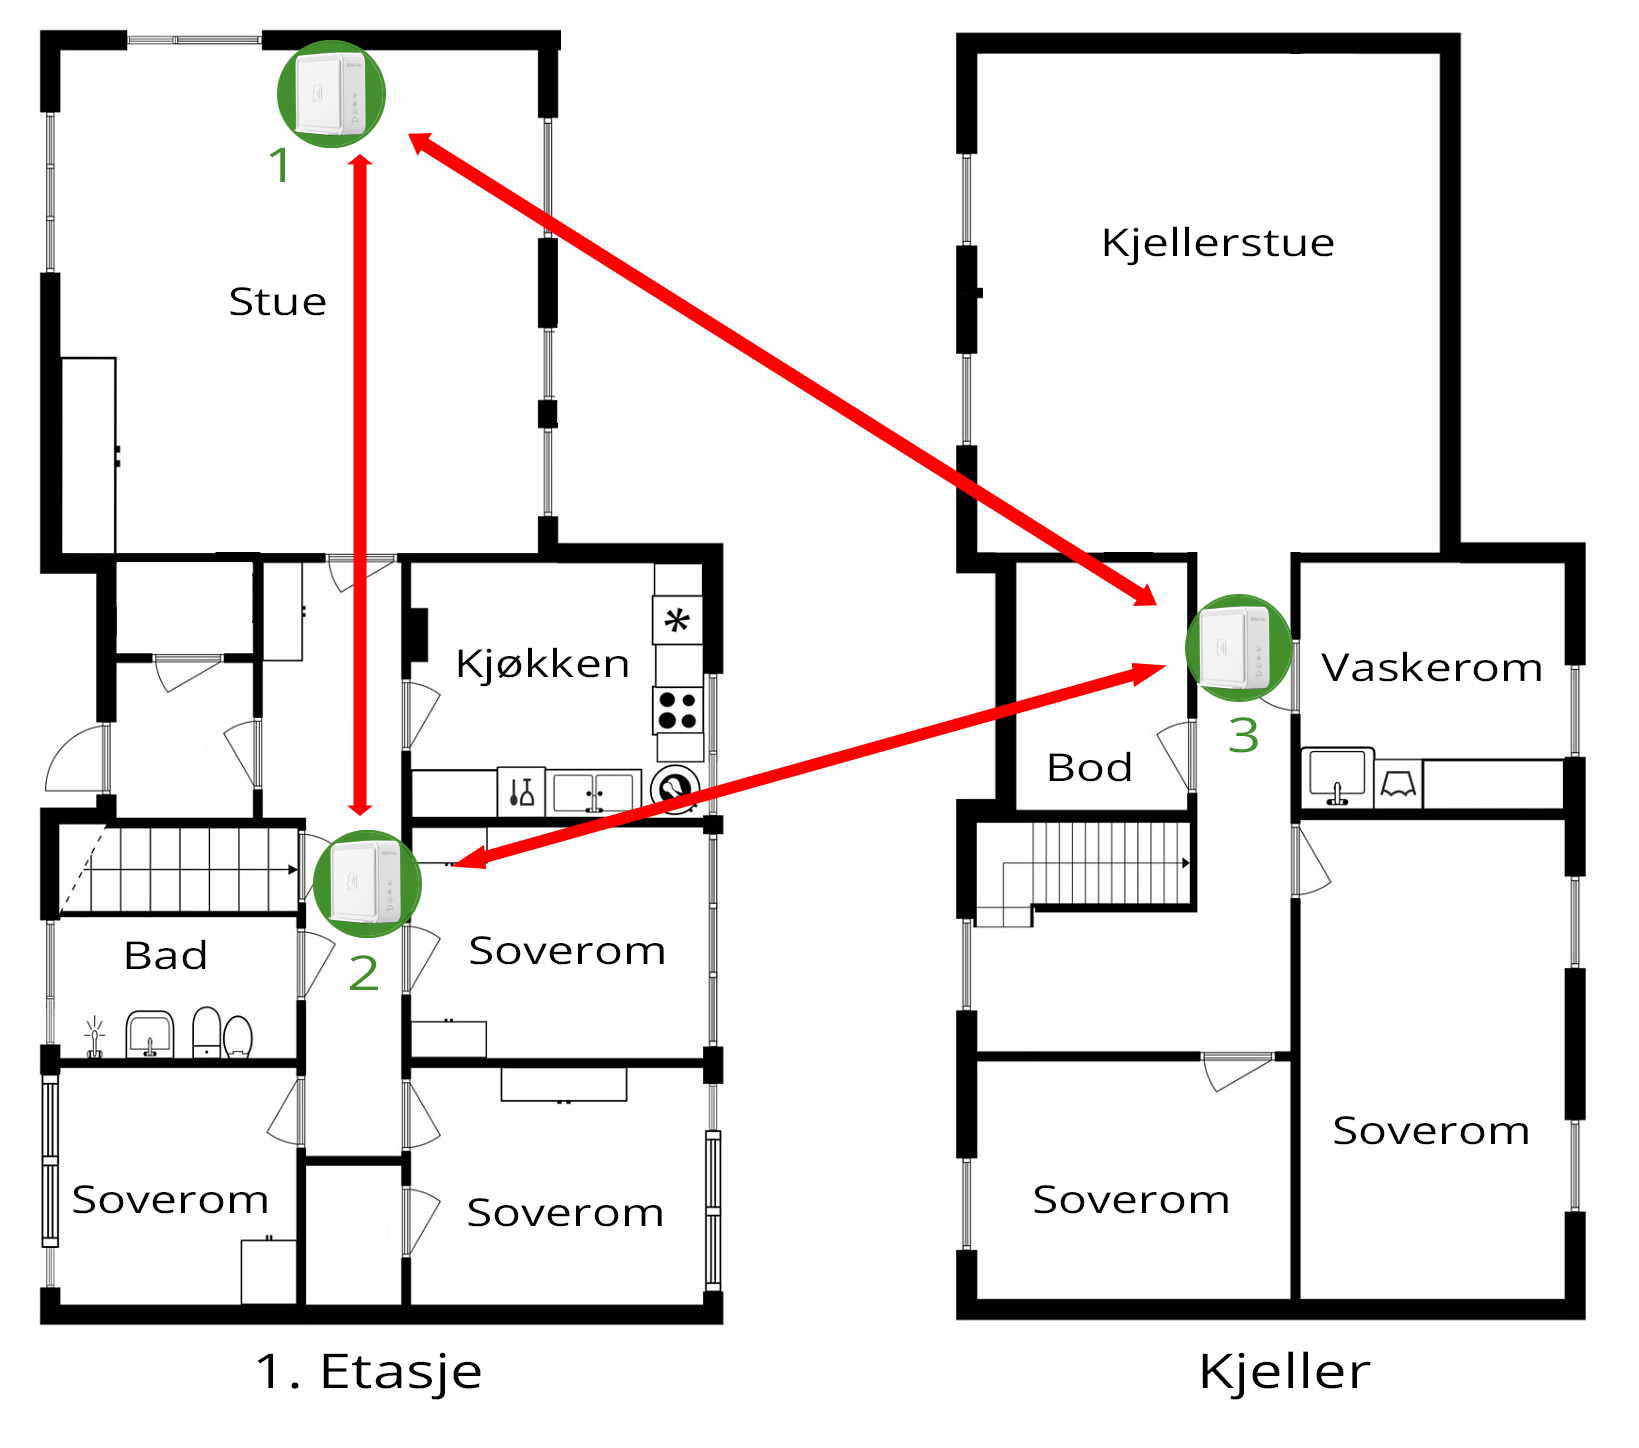 The illustration shows a layout with a home pack (three devices) in one house, with one unit downstairs and two on the ground floor.